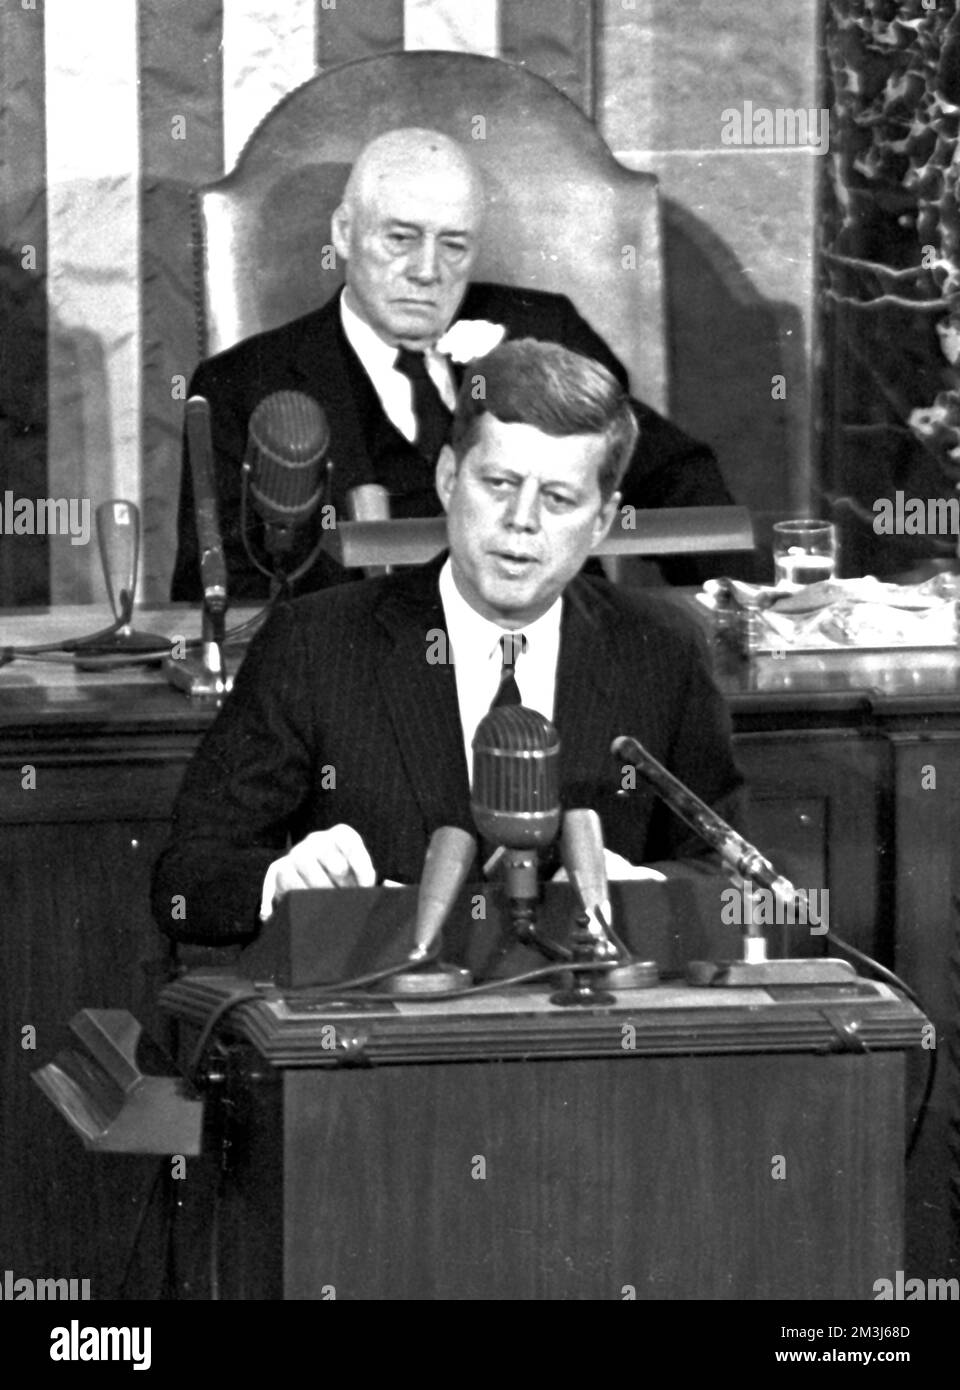 **FILE PHOTO** National Archives release classified JFK assassination files. United States President John F. Kennedy outlined his vision for manned exploration of space to a Joint Session of the United States Congress, in Washington, DC on May 25, 1961 when he declared, '.I believe this nation should commit itself to achieving the goal, before this decade is out, of landing a man on the Moon and returning him safely to the Earth.' This goal was achieved when astronaut Neil A. Armstrong became the first human to set foot upon the Moon at 10:56 p.m. EDT, July 20, 1969. Shown in the backgroun Stock Photo